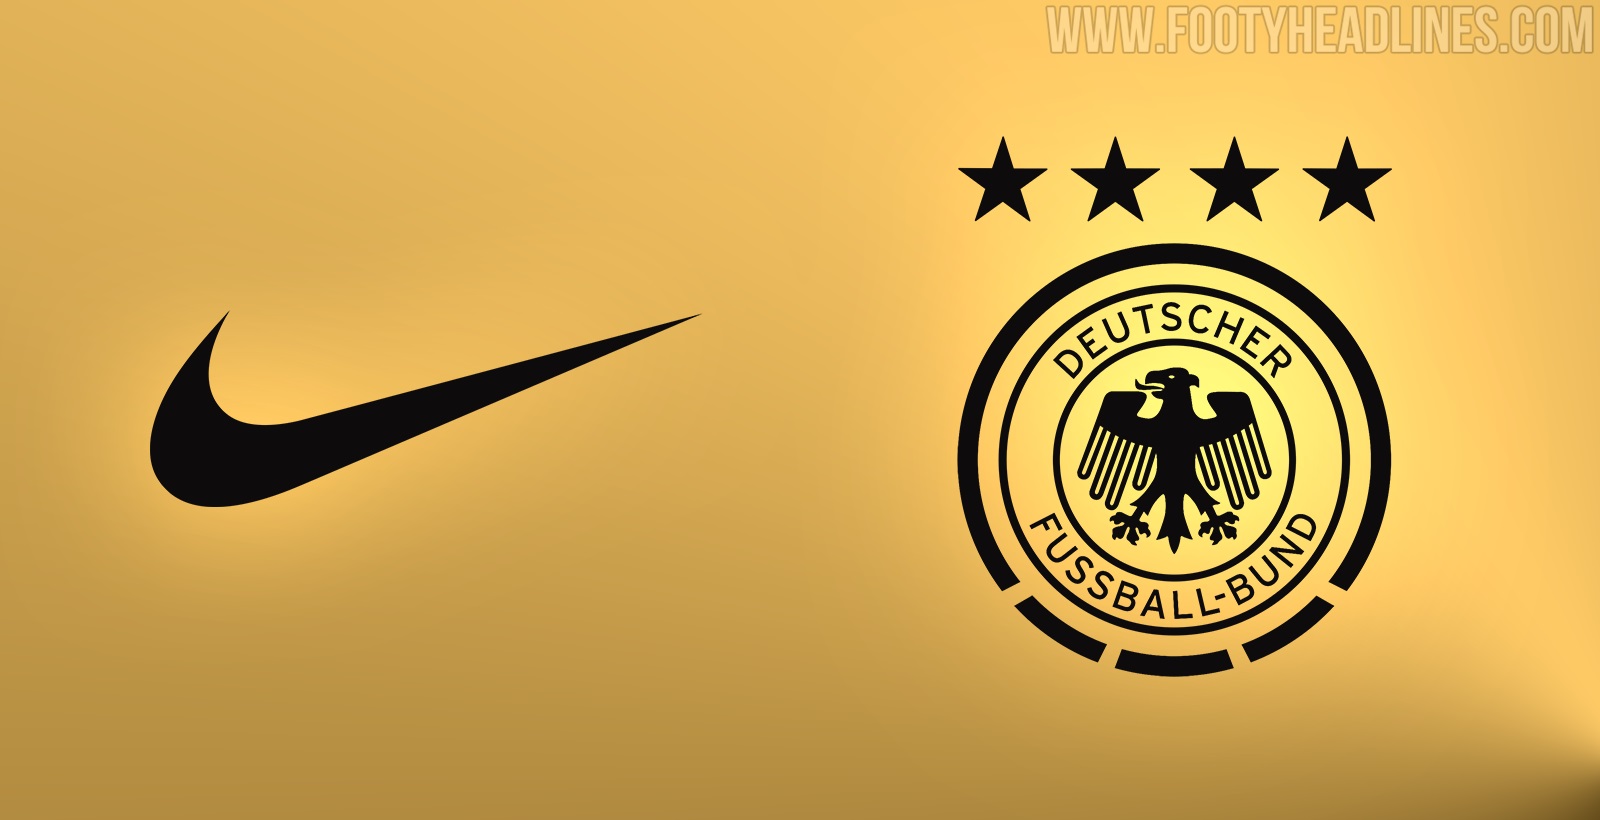 Nike to Pay Germany More Than 100 Million Euro/Year - Adidas Surprised by  End of Germany Partnership - Footy Headlines